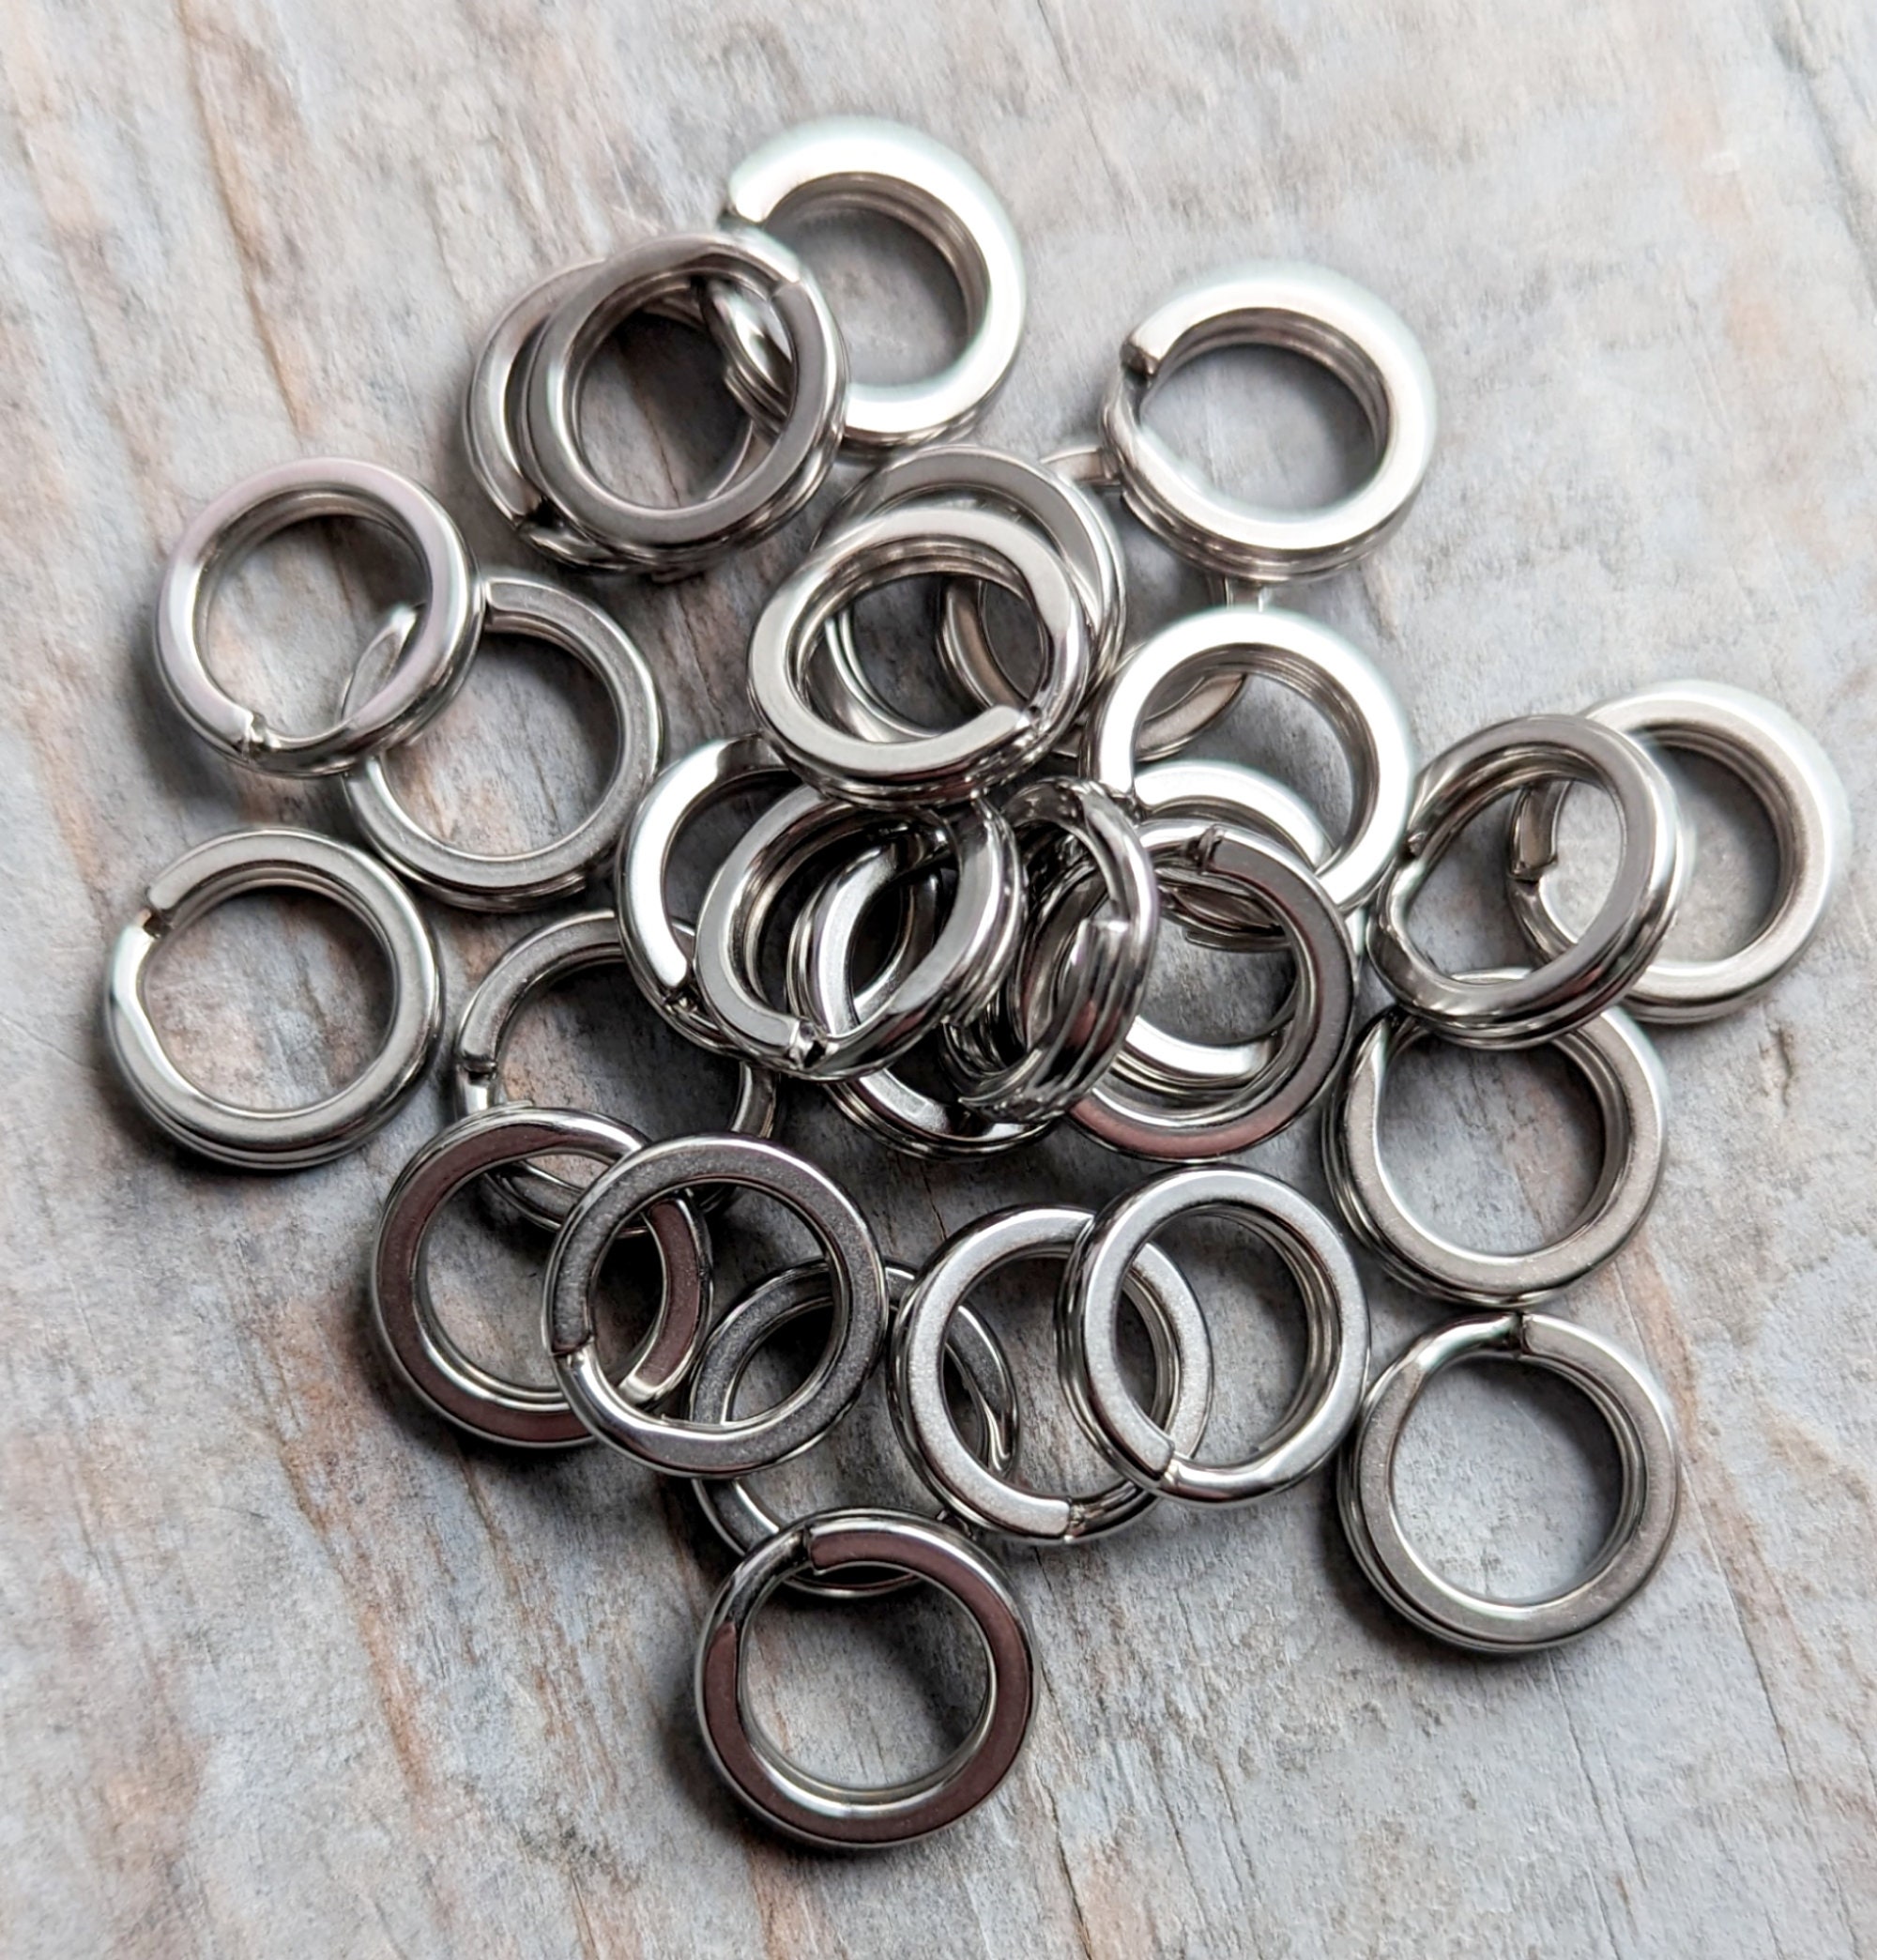 Heavy Duty Split Rings 4 Stainless Steel 8mm Small Ring Connectors  Flattened Chain Maille 100lb Pulling Resistance 